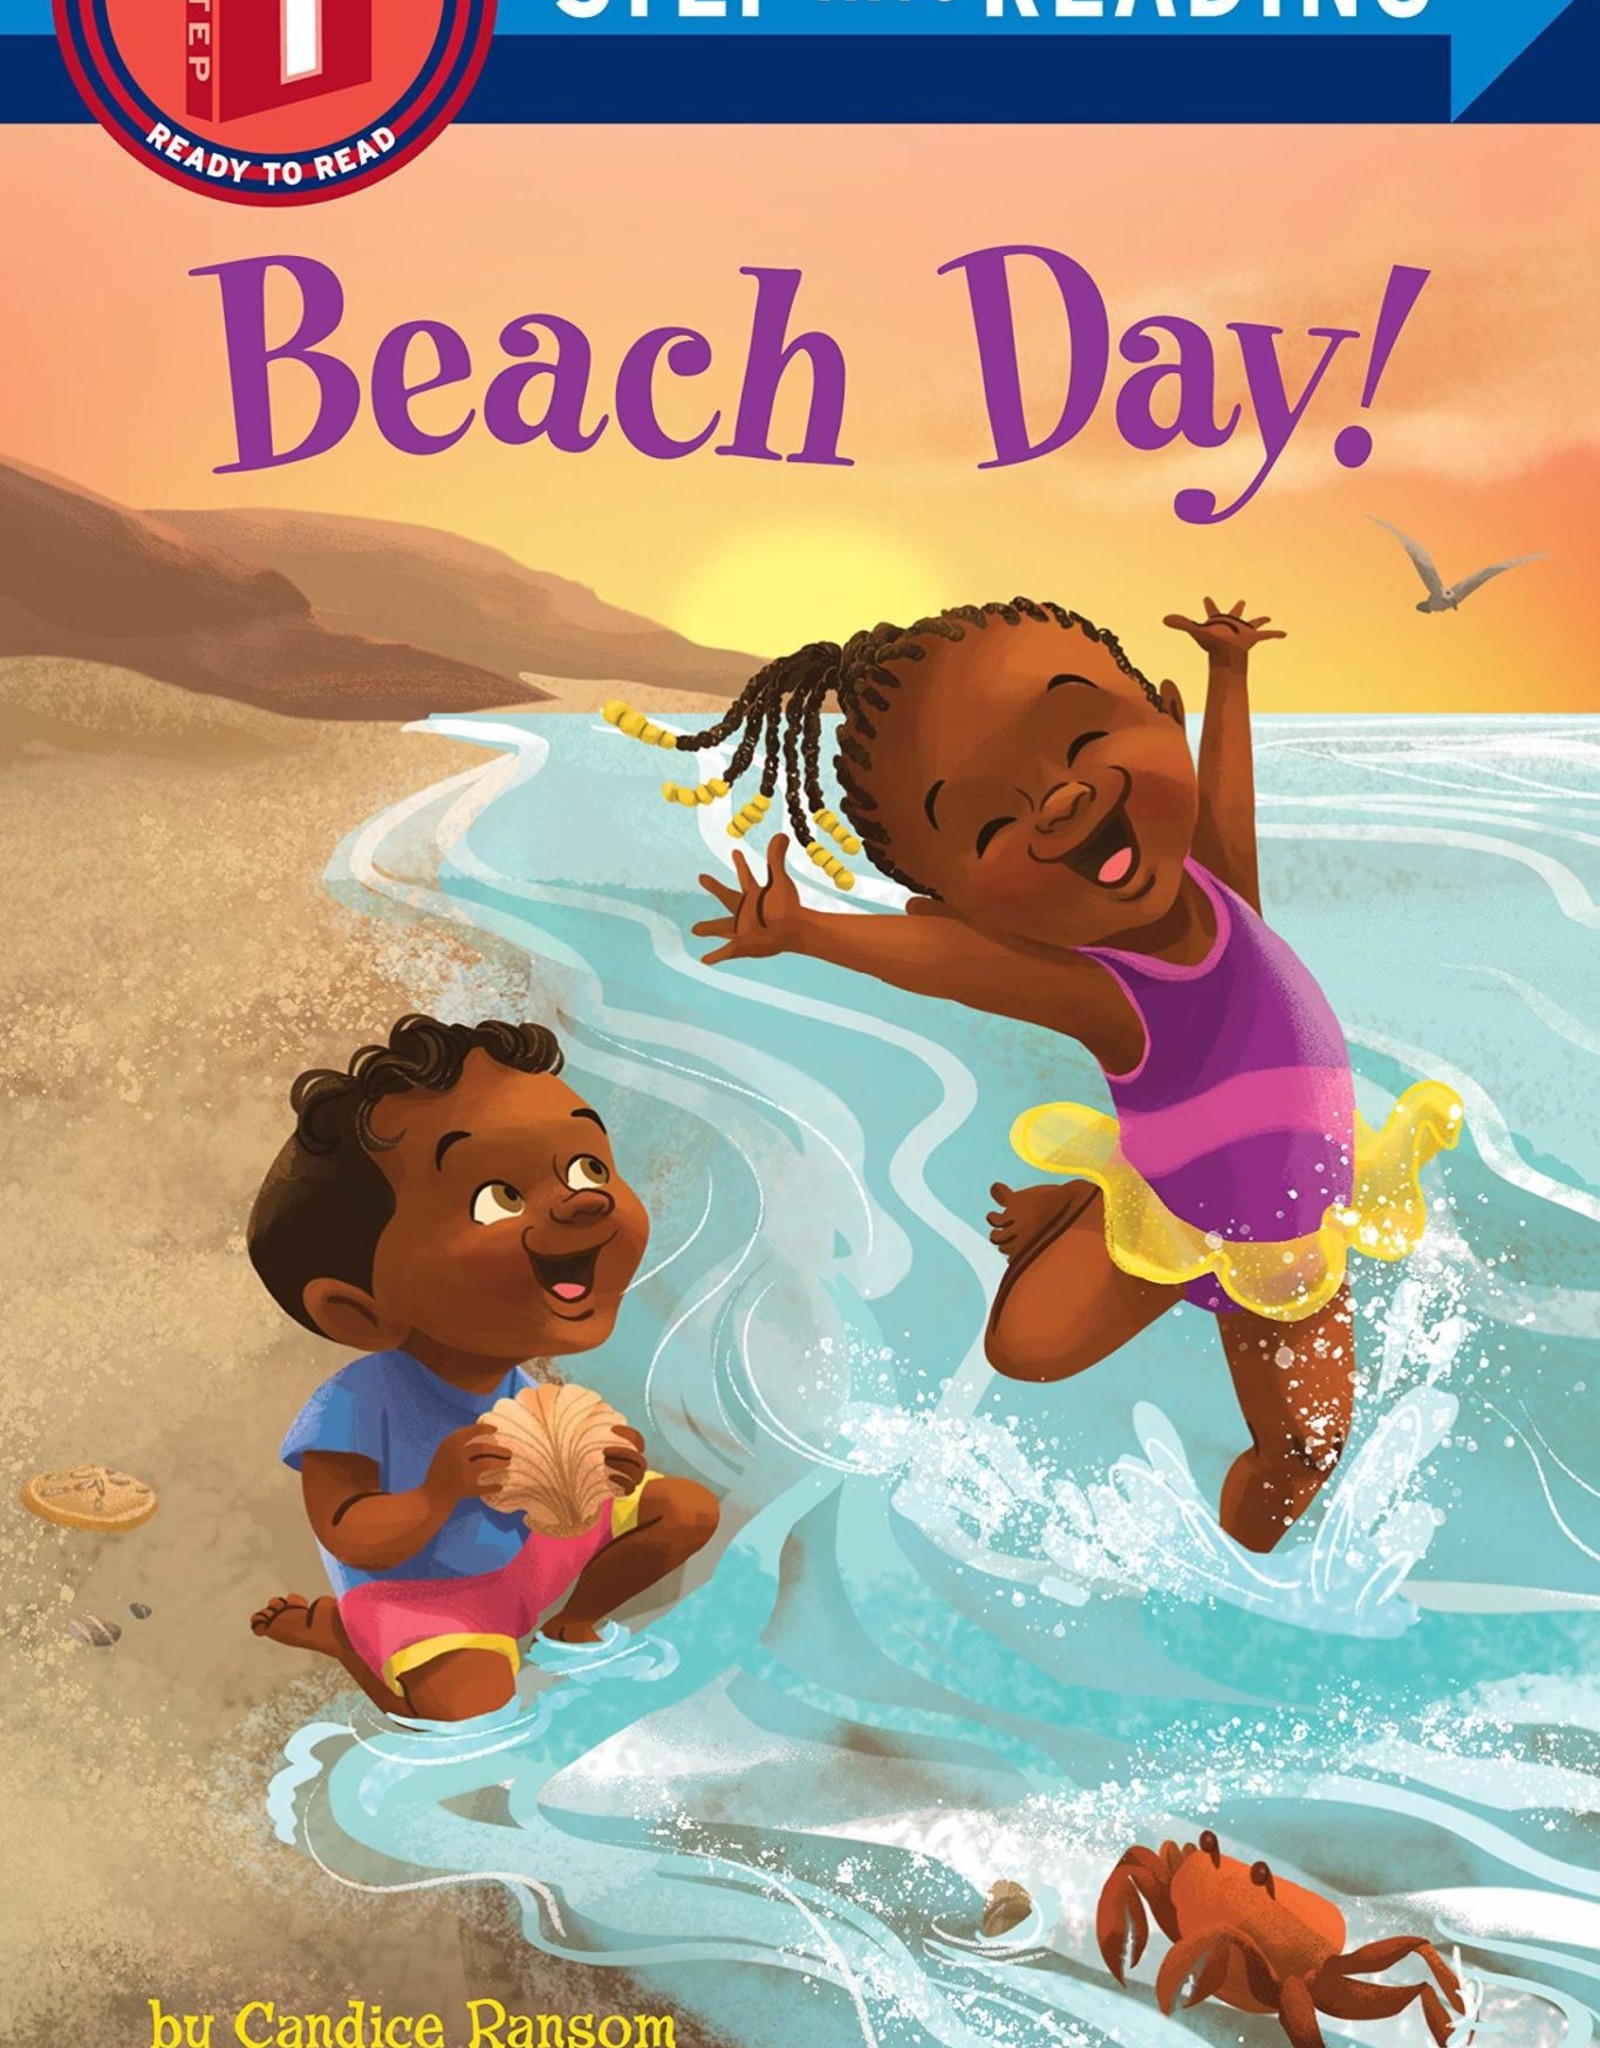 Step Into Reading 1: Beach Day!